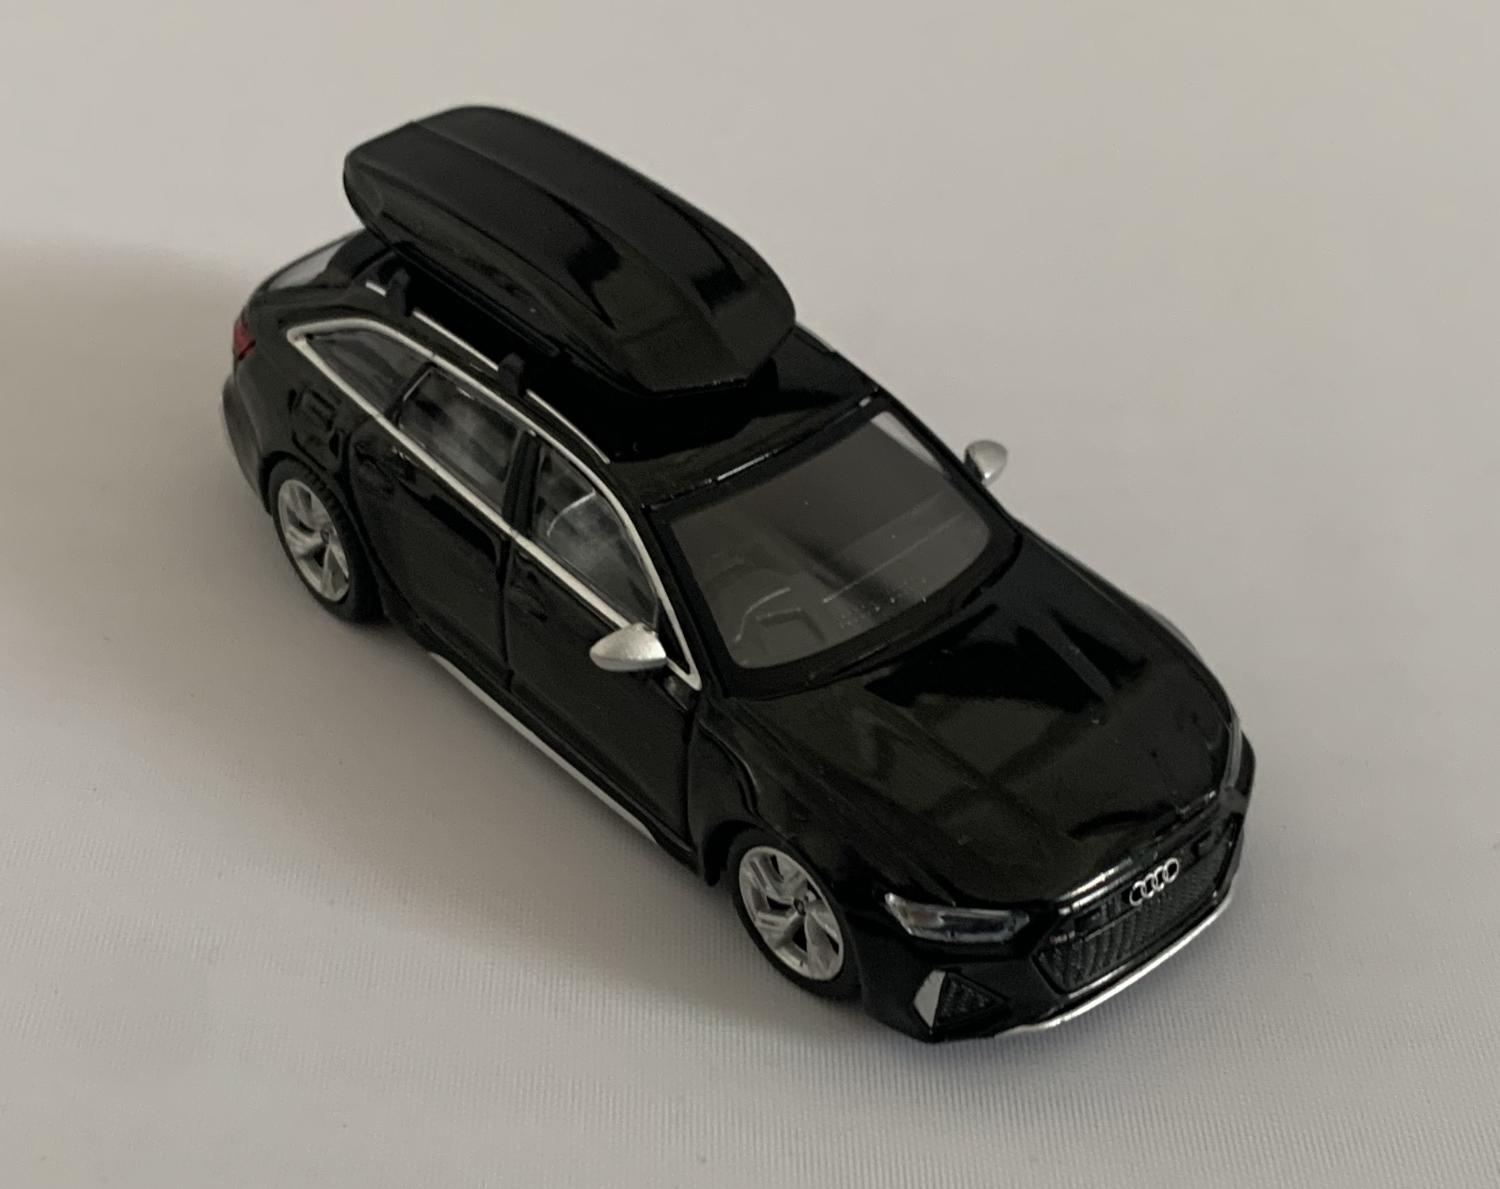 An excellent scale model of a Audi RS 6 Avant decorated in mythos black metallic with box roof and silver wheels.